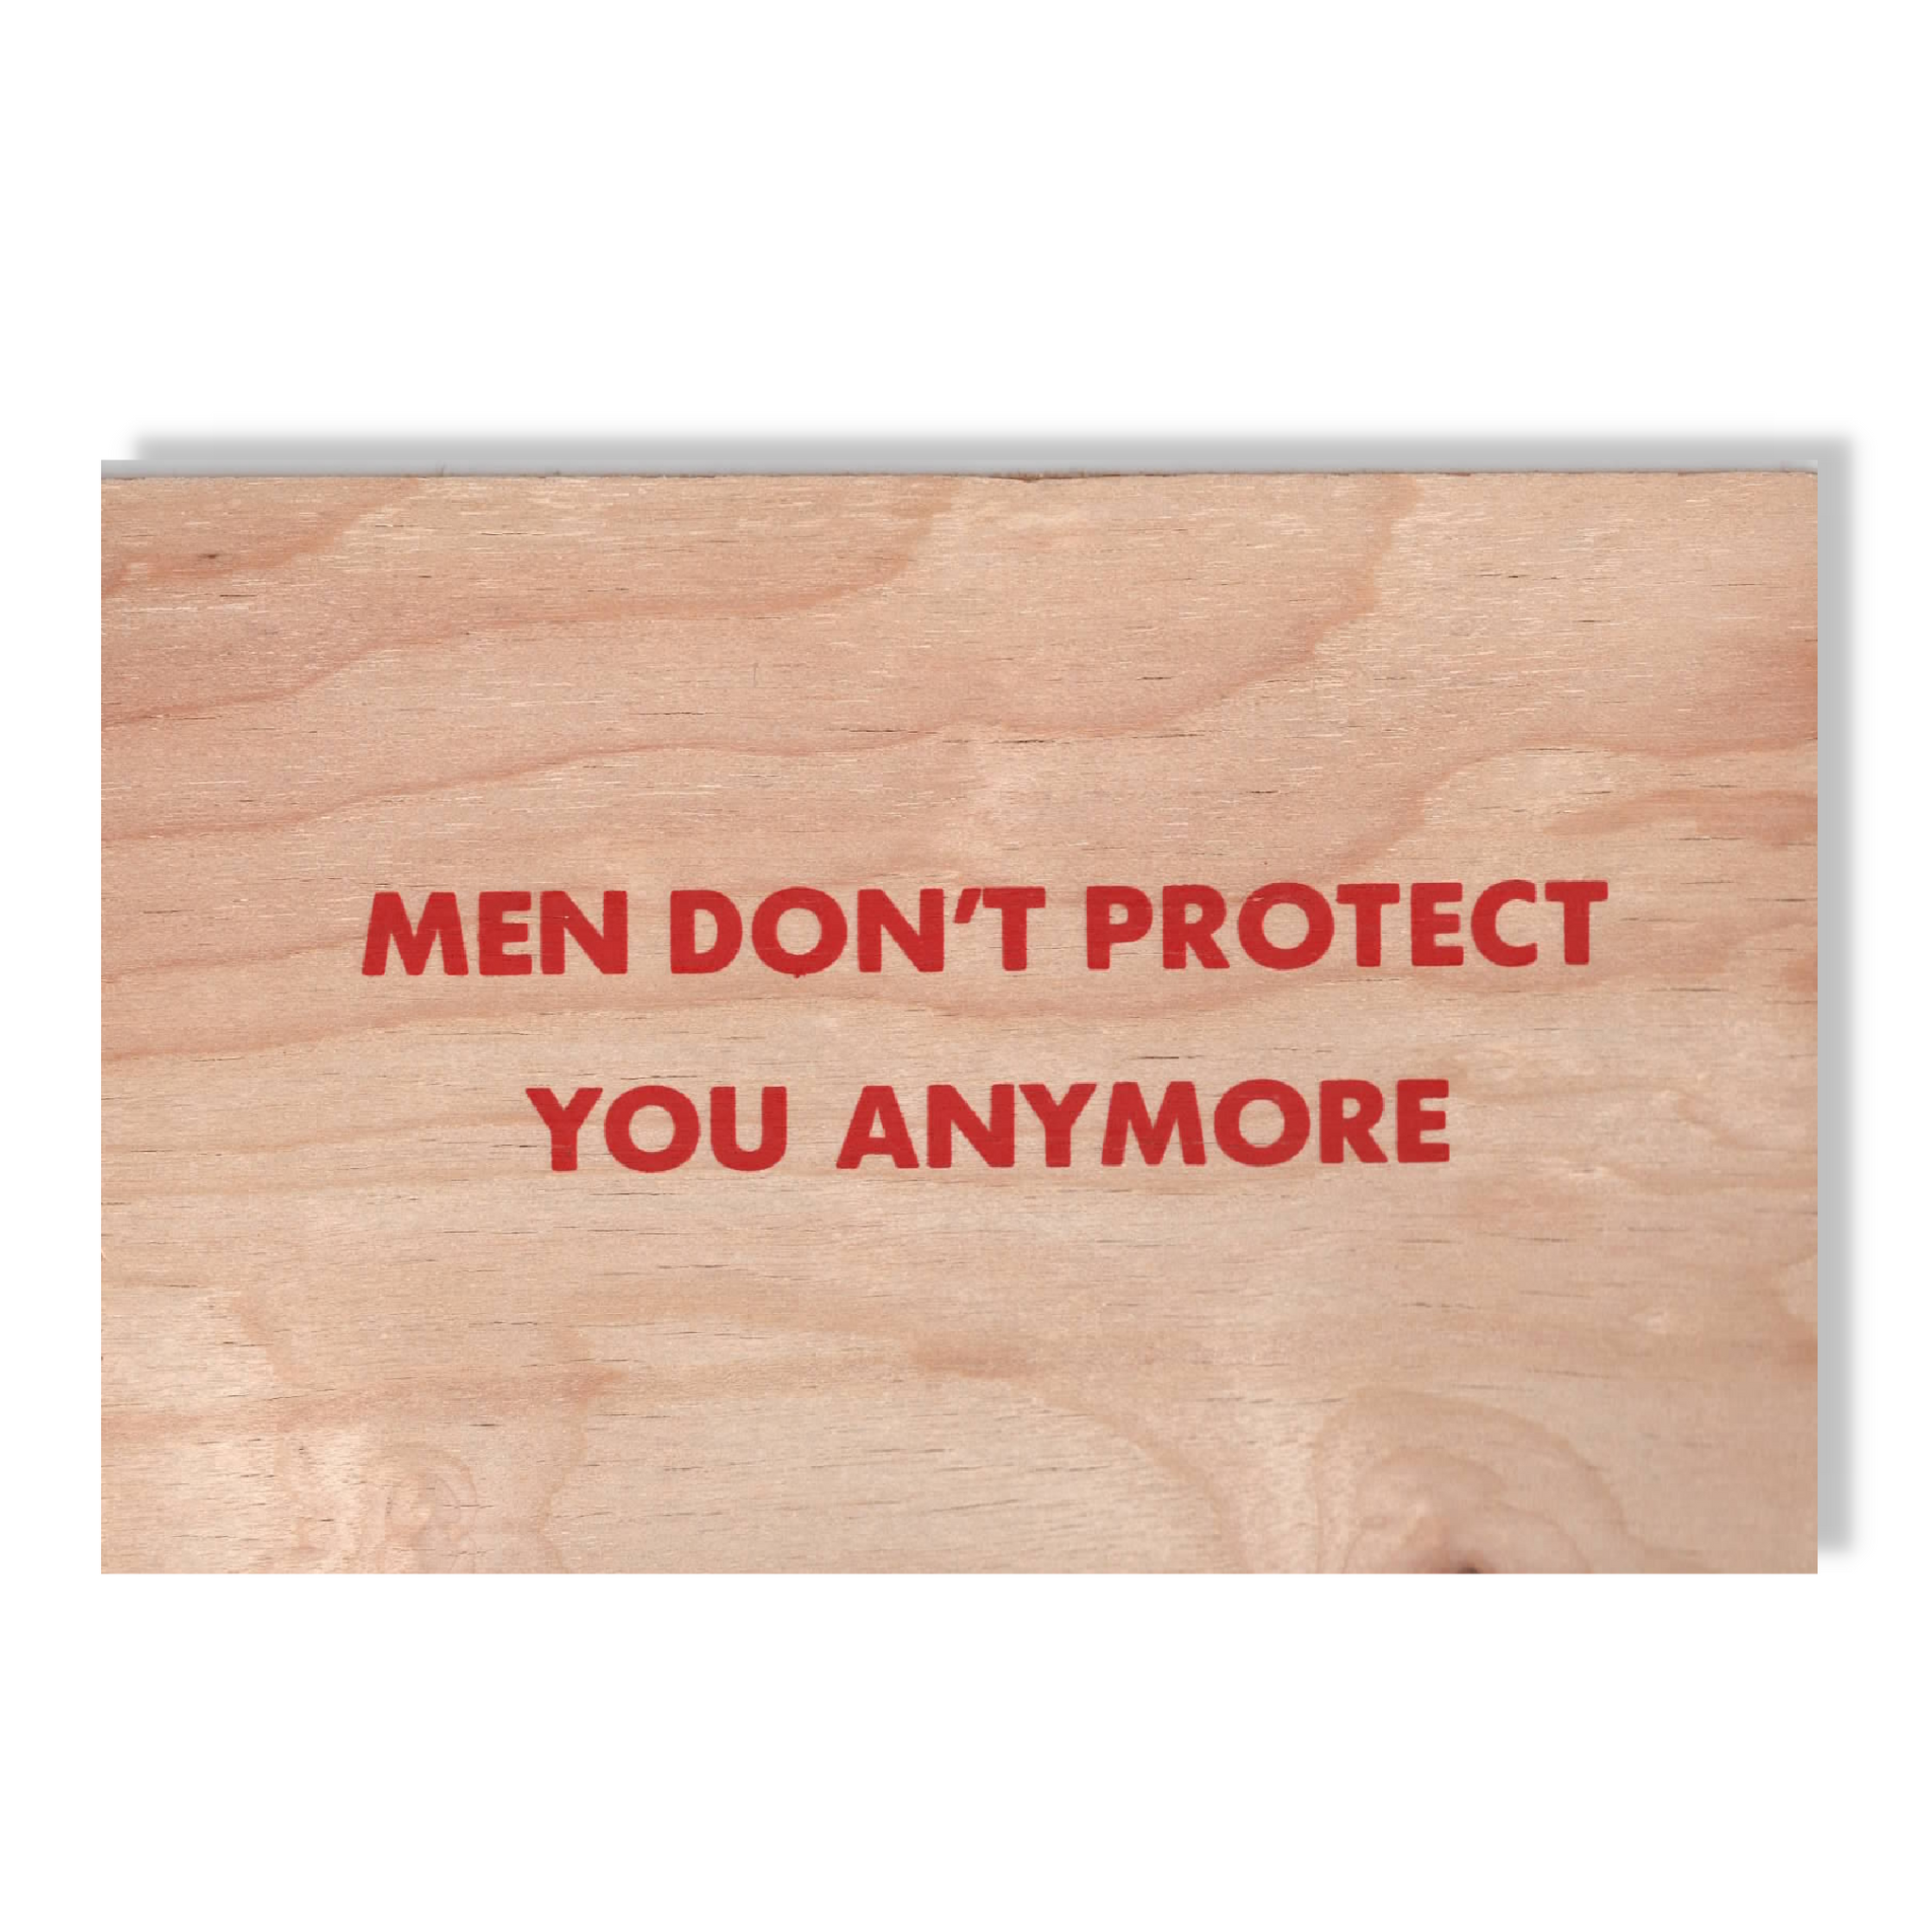 Jenny Holzer - Truism [Men Don't Protect You Anymore]